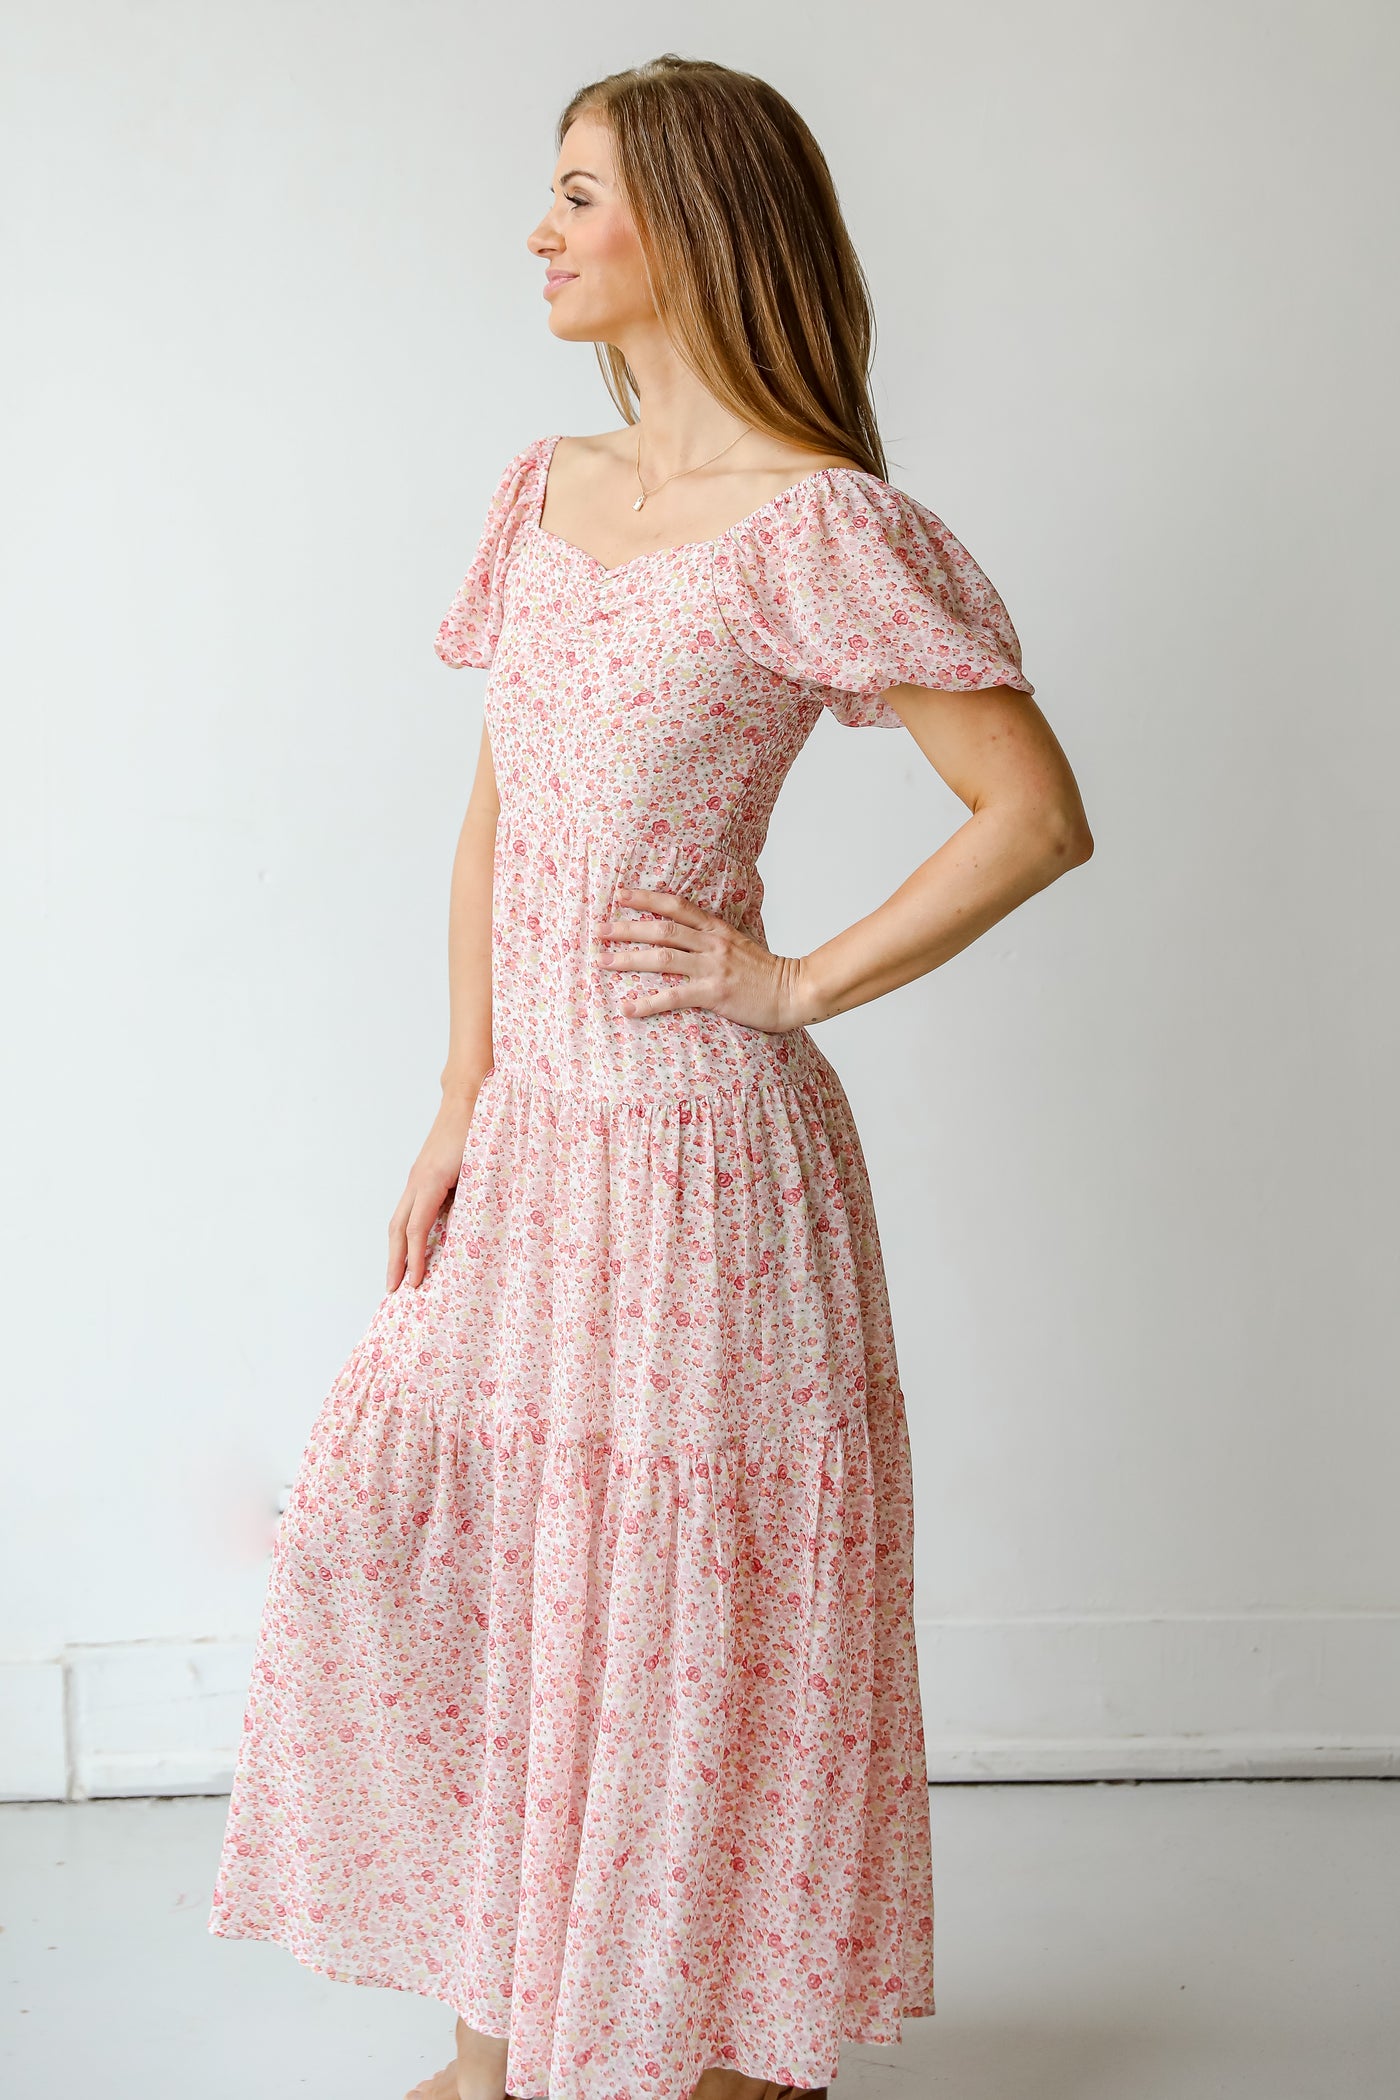 Floral Maxi Dress side view